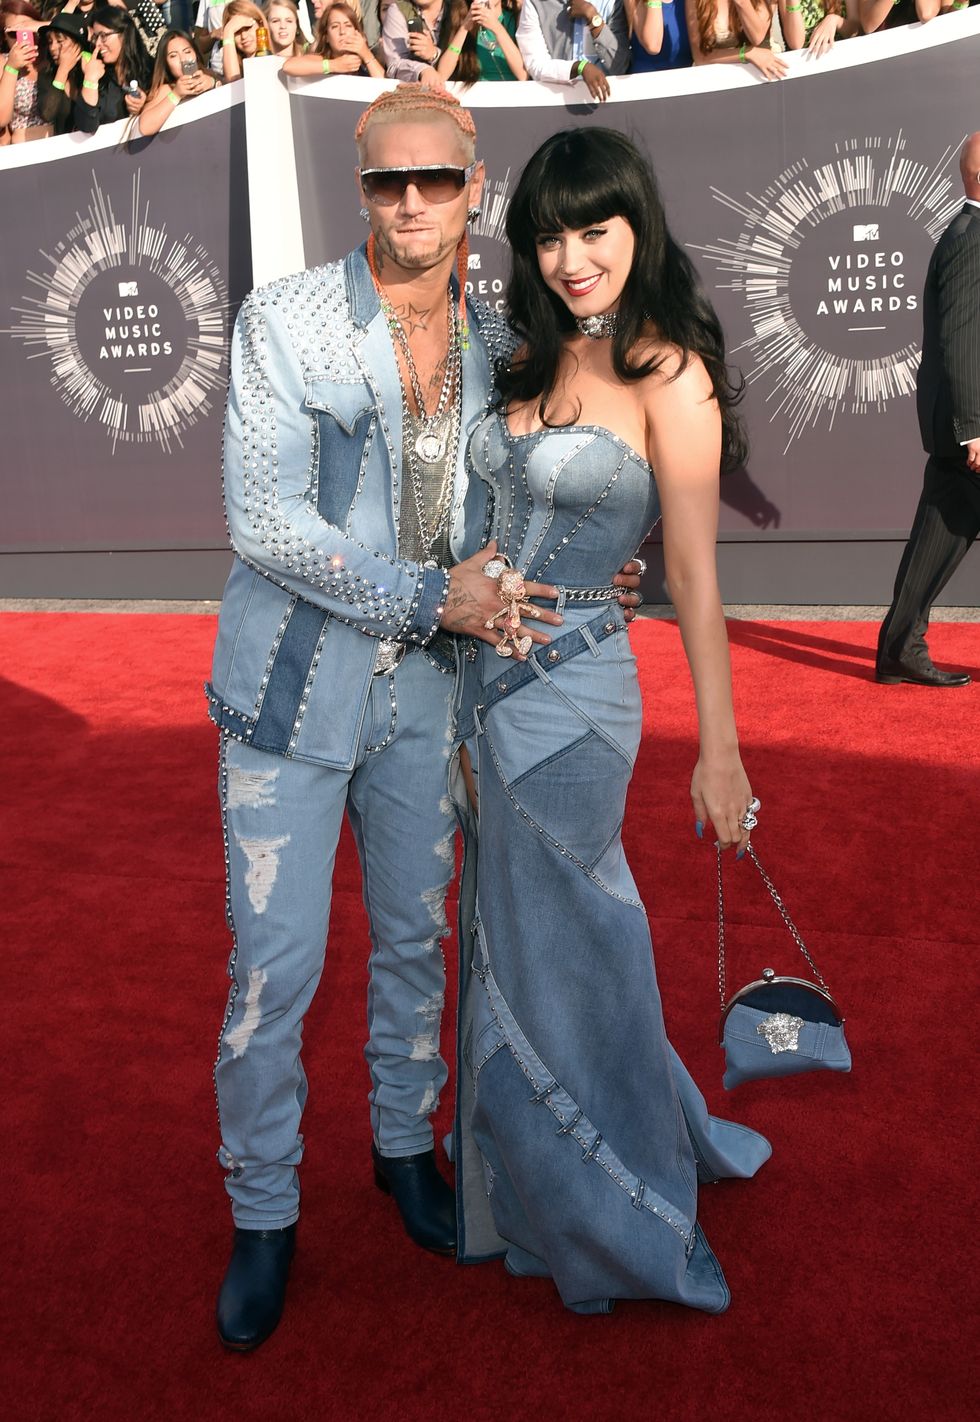 Katy Perry pays homage to Britney Spears in double denim dress at the 2014 VMAs